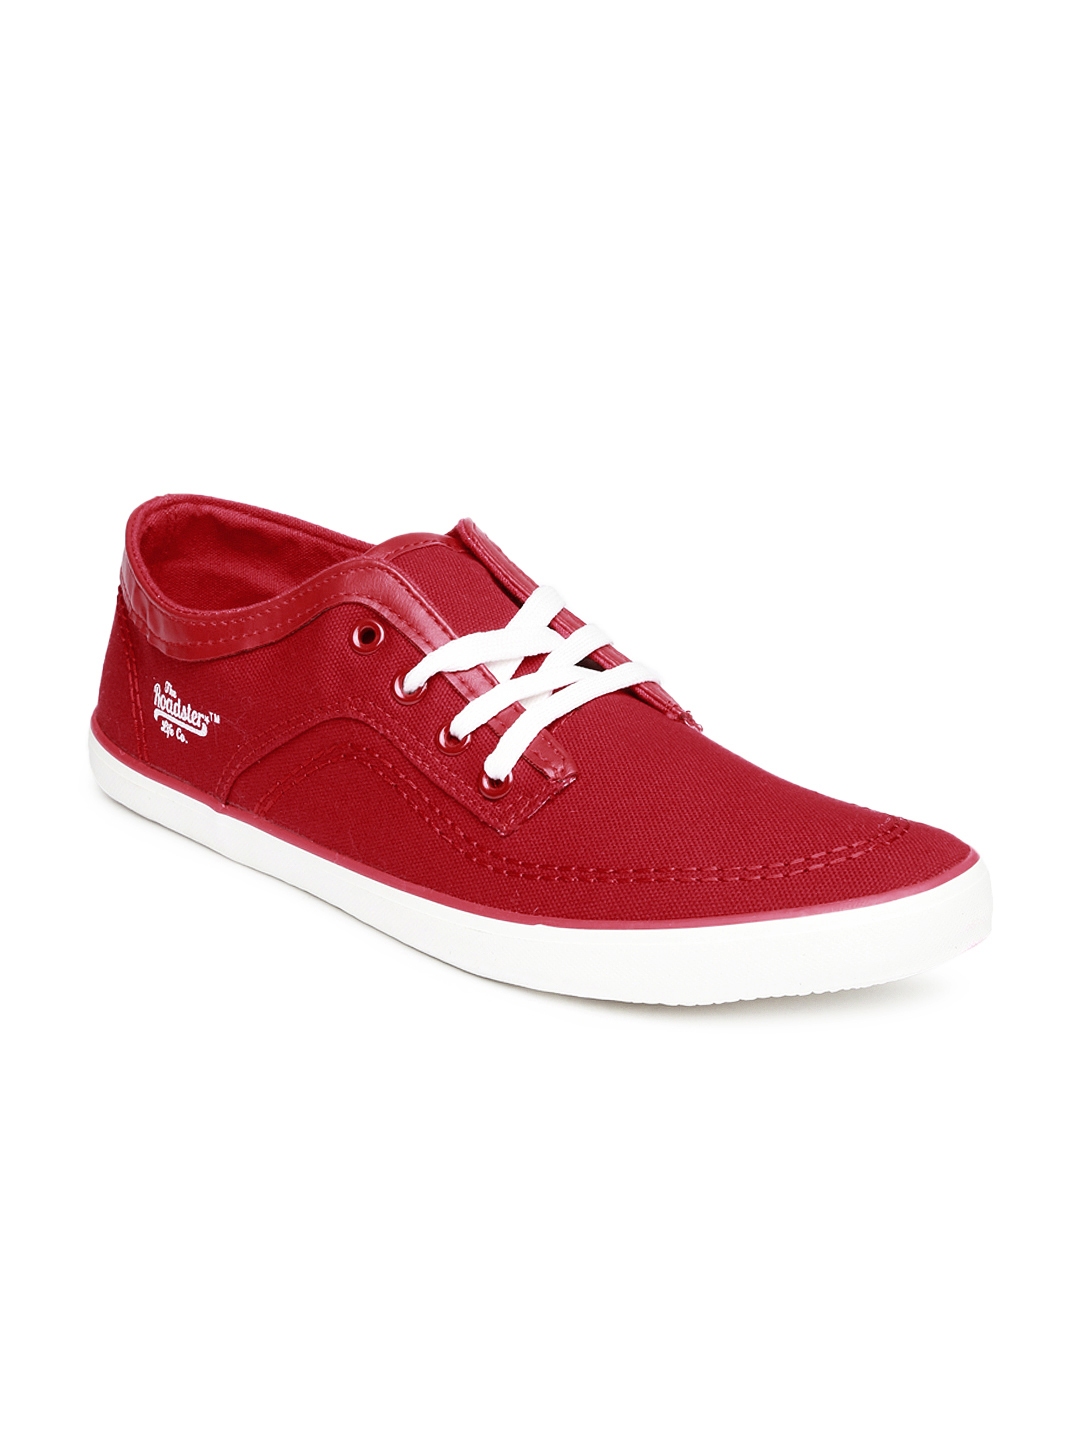 Buy Roadster Men Red Casual Shoes - Casual Shoes for Men 744617 | Myntra